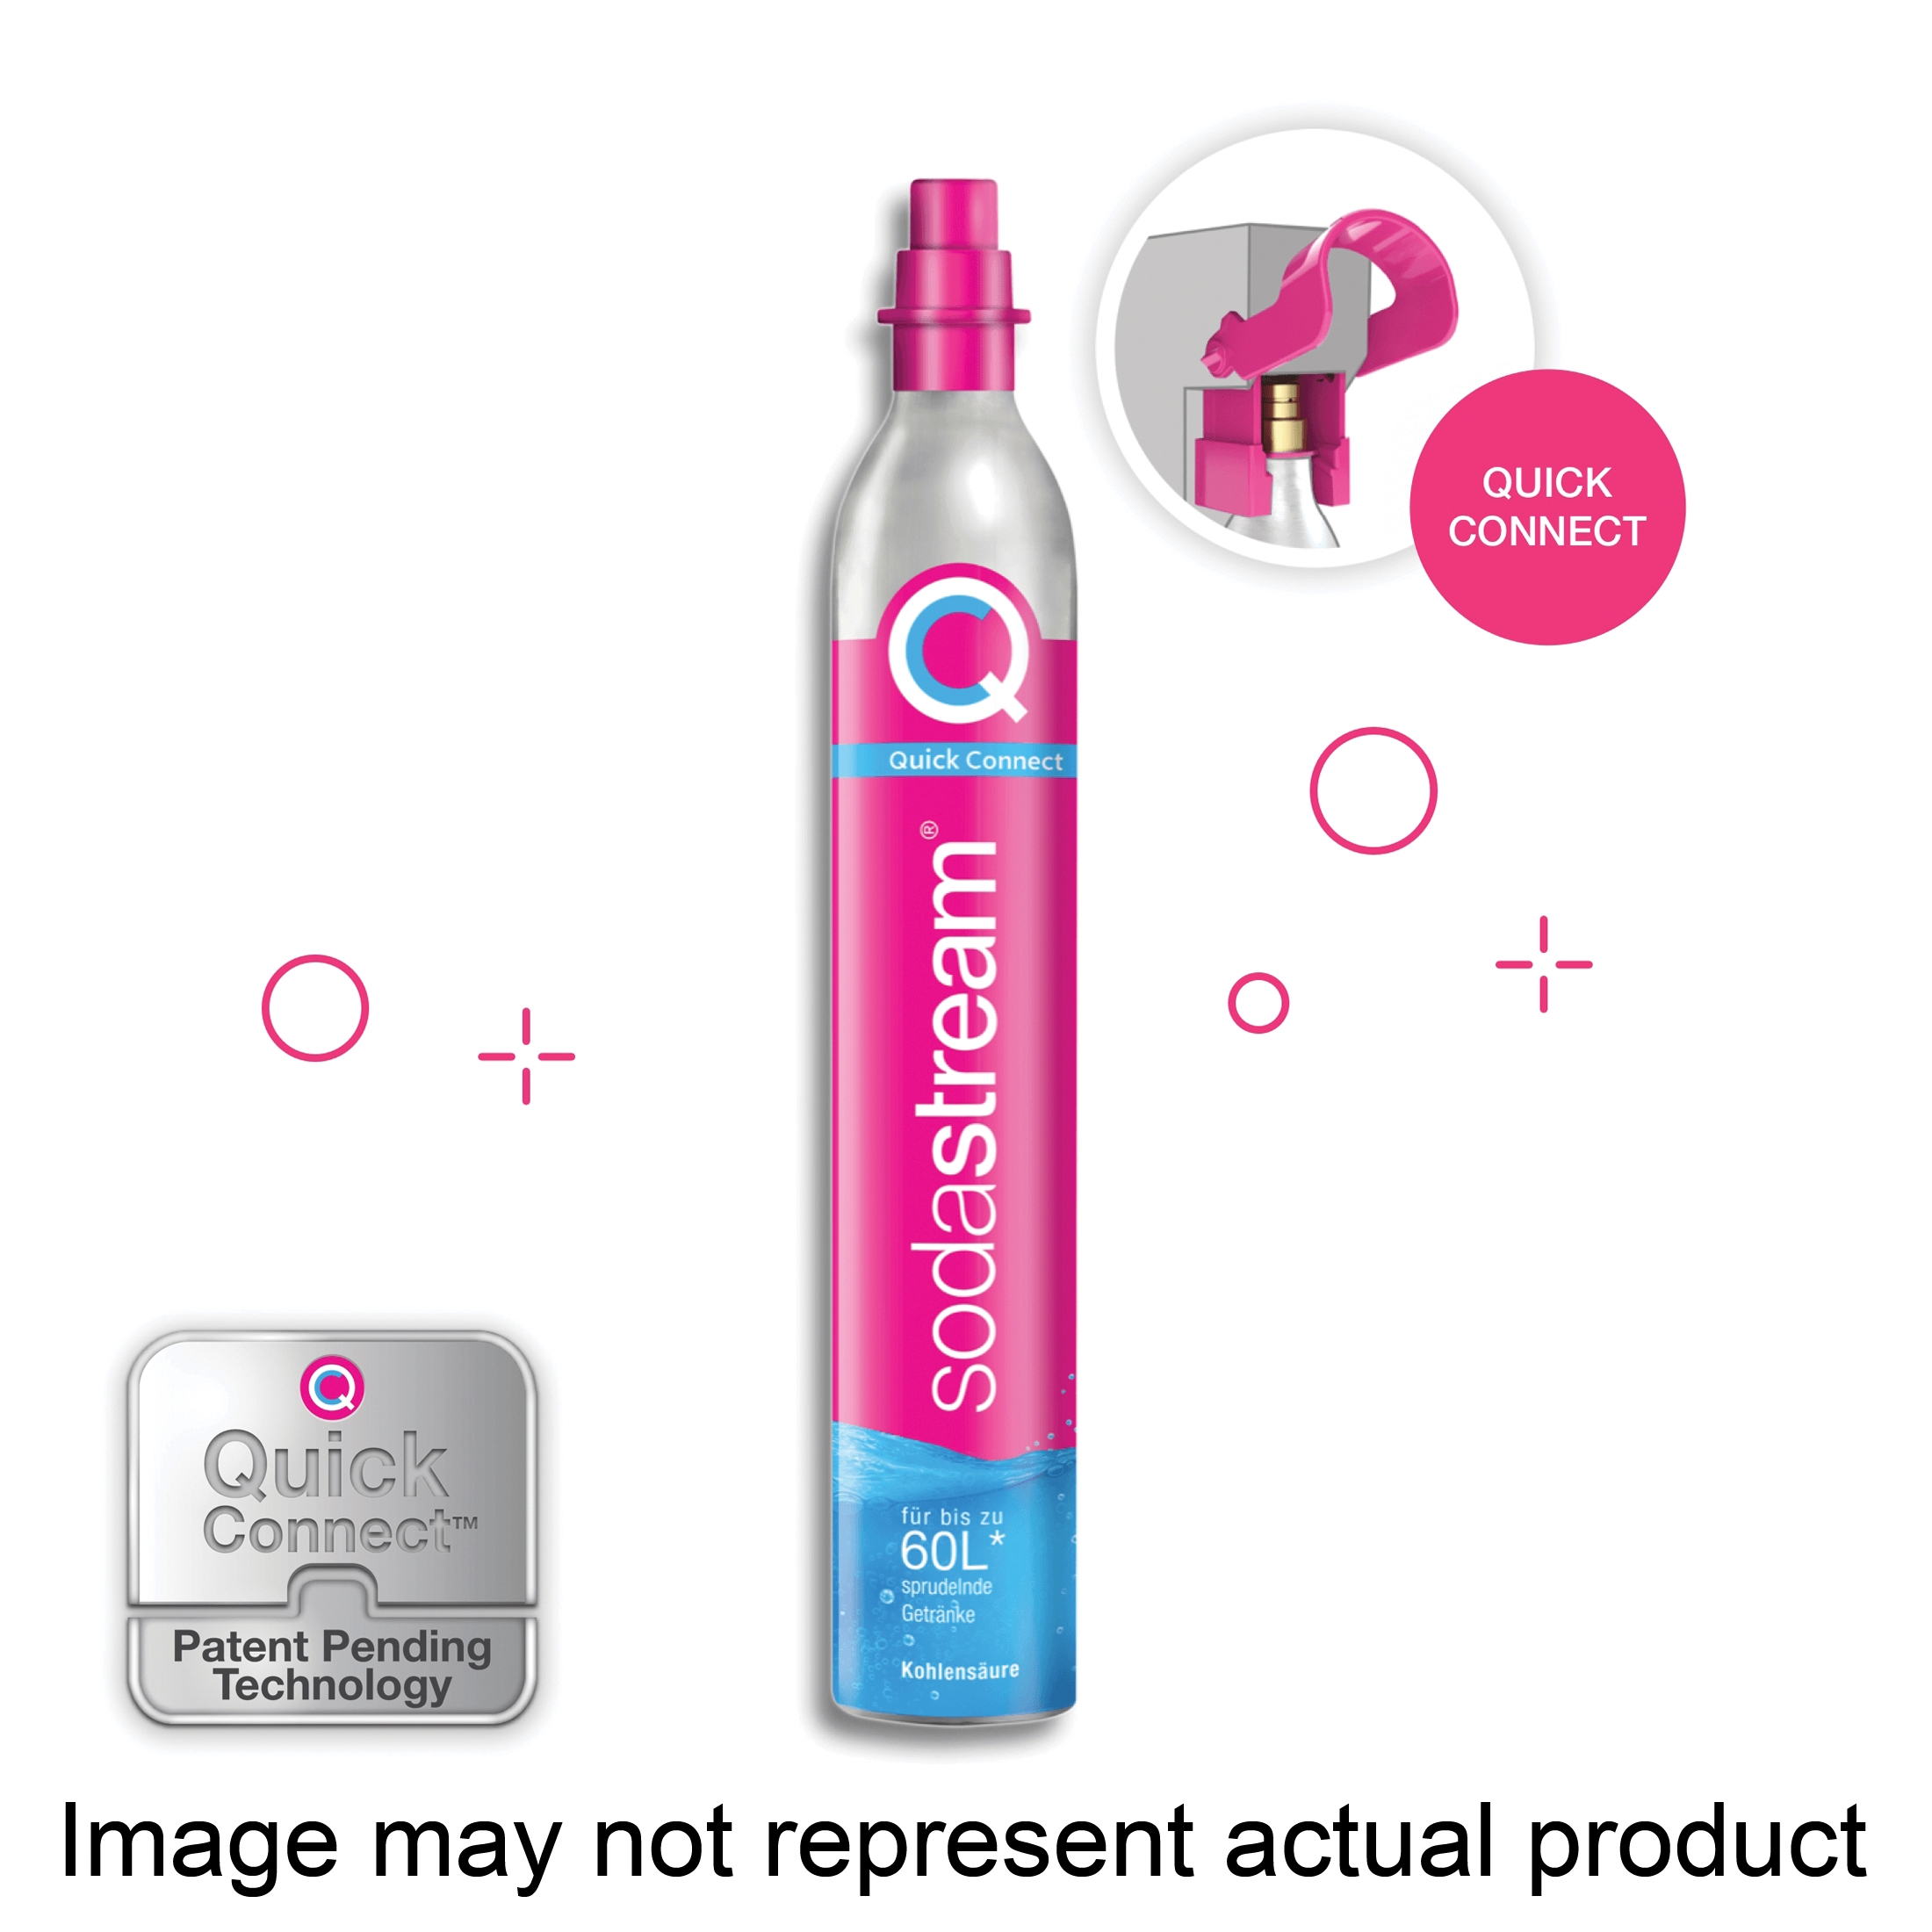 Sodastream 1132250010 CO2 Cylinder, Quick-Connect, Pink - 1